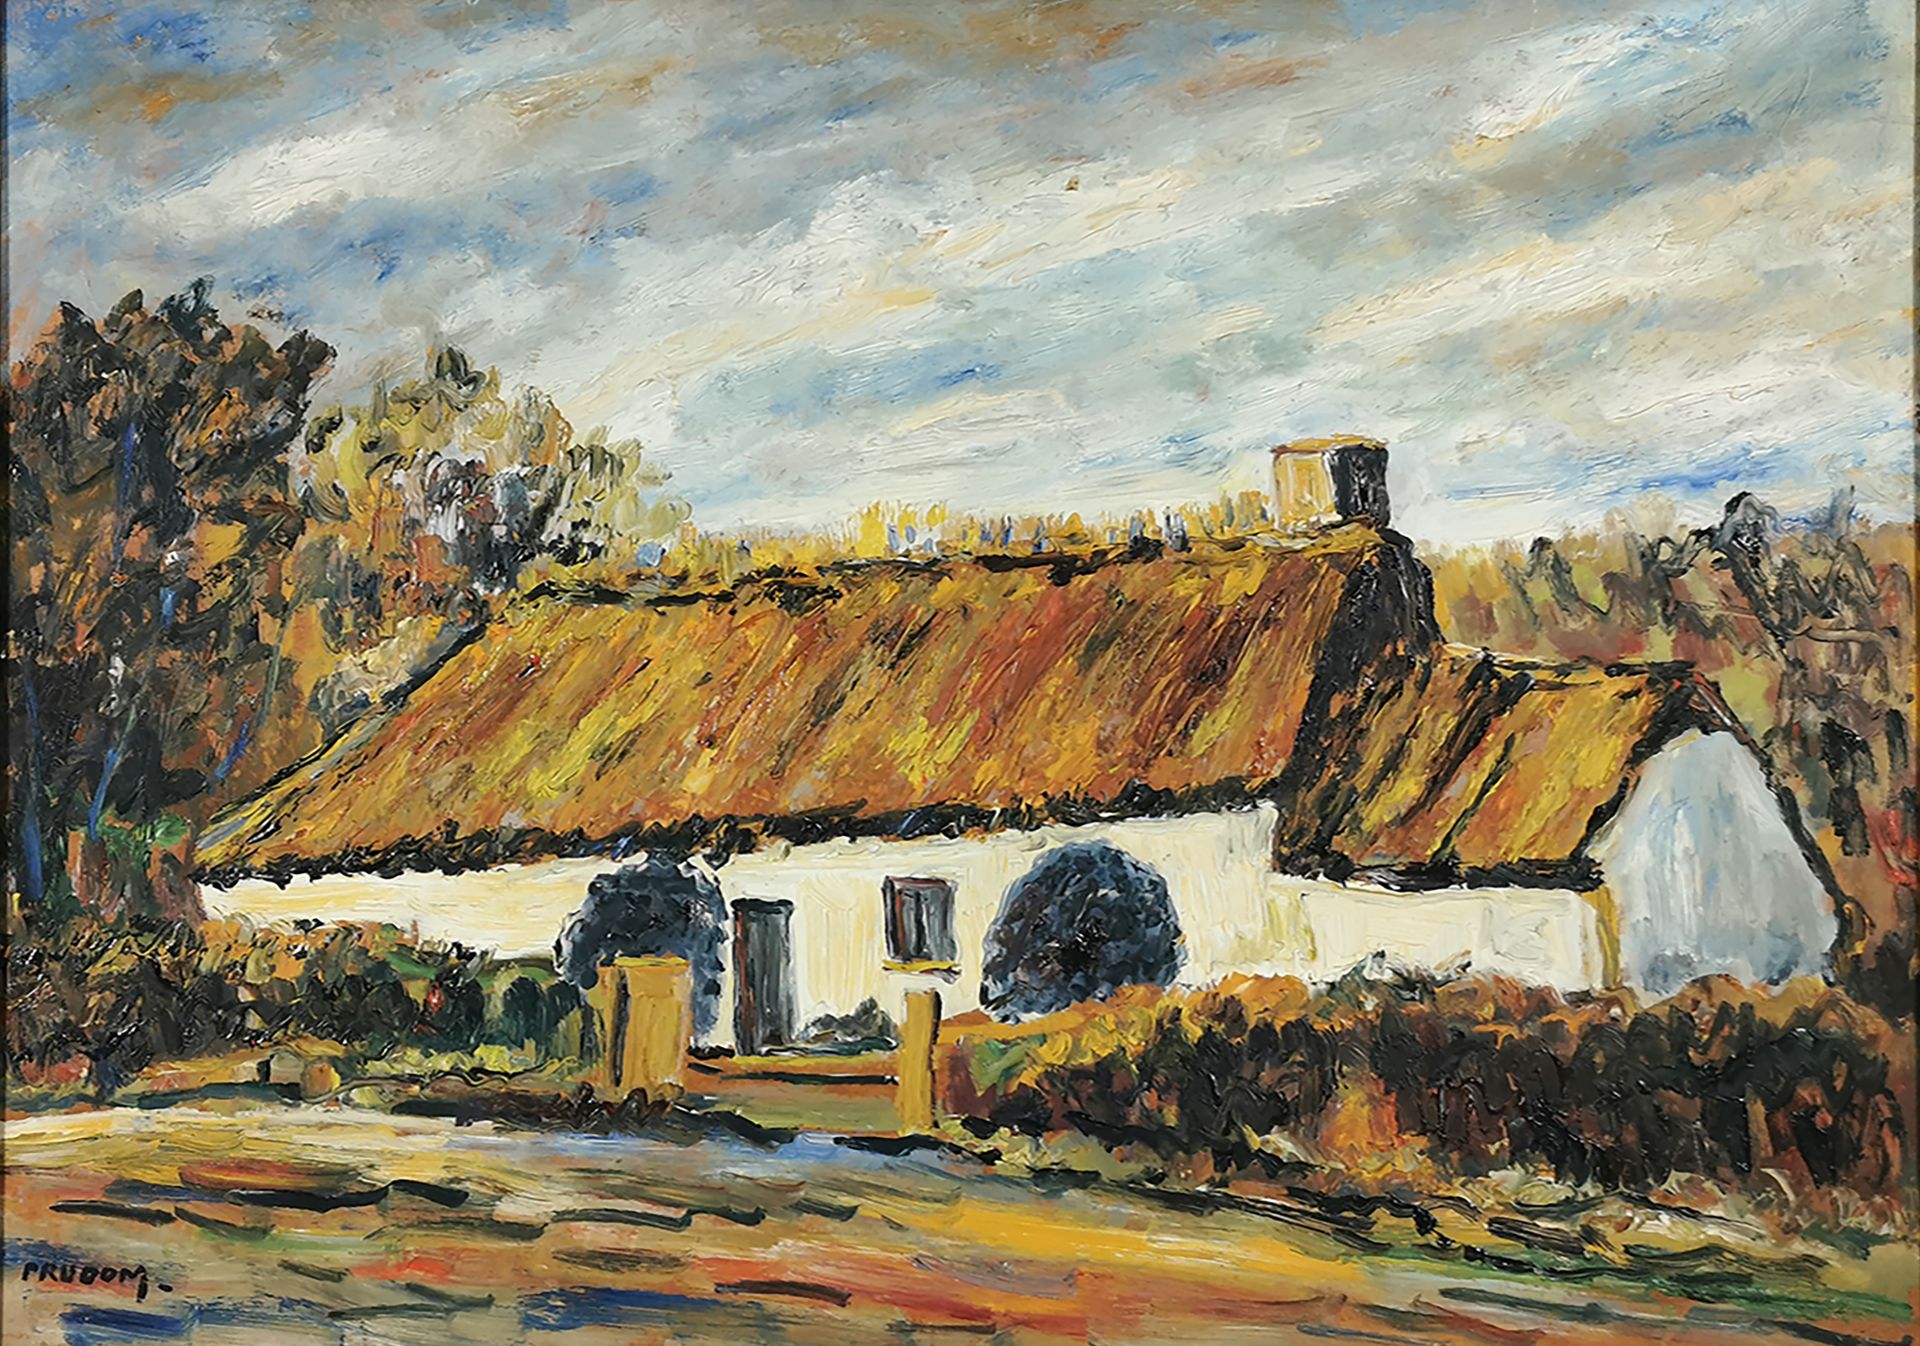 Null PRUDOM, Georges PRUD'HOMME said (1927-1992)

The thatched cottage

Oil on i&hellip;